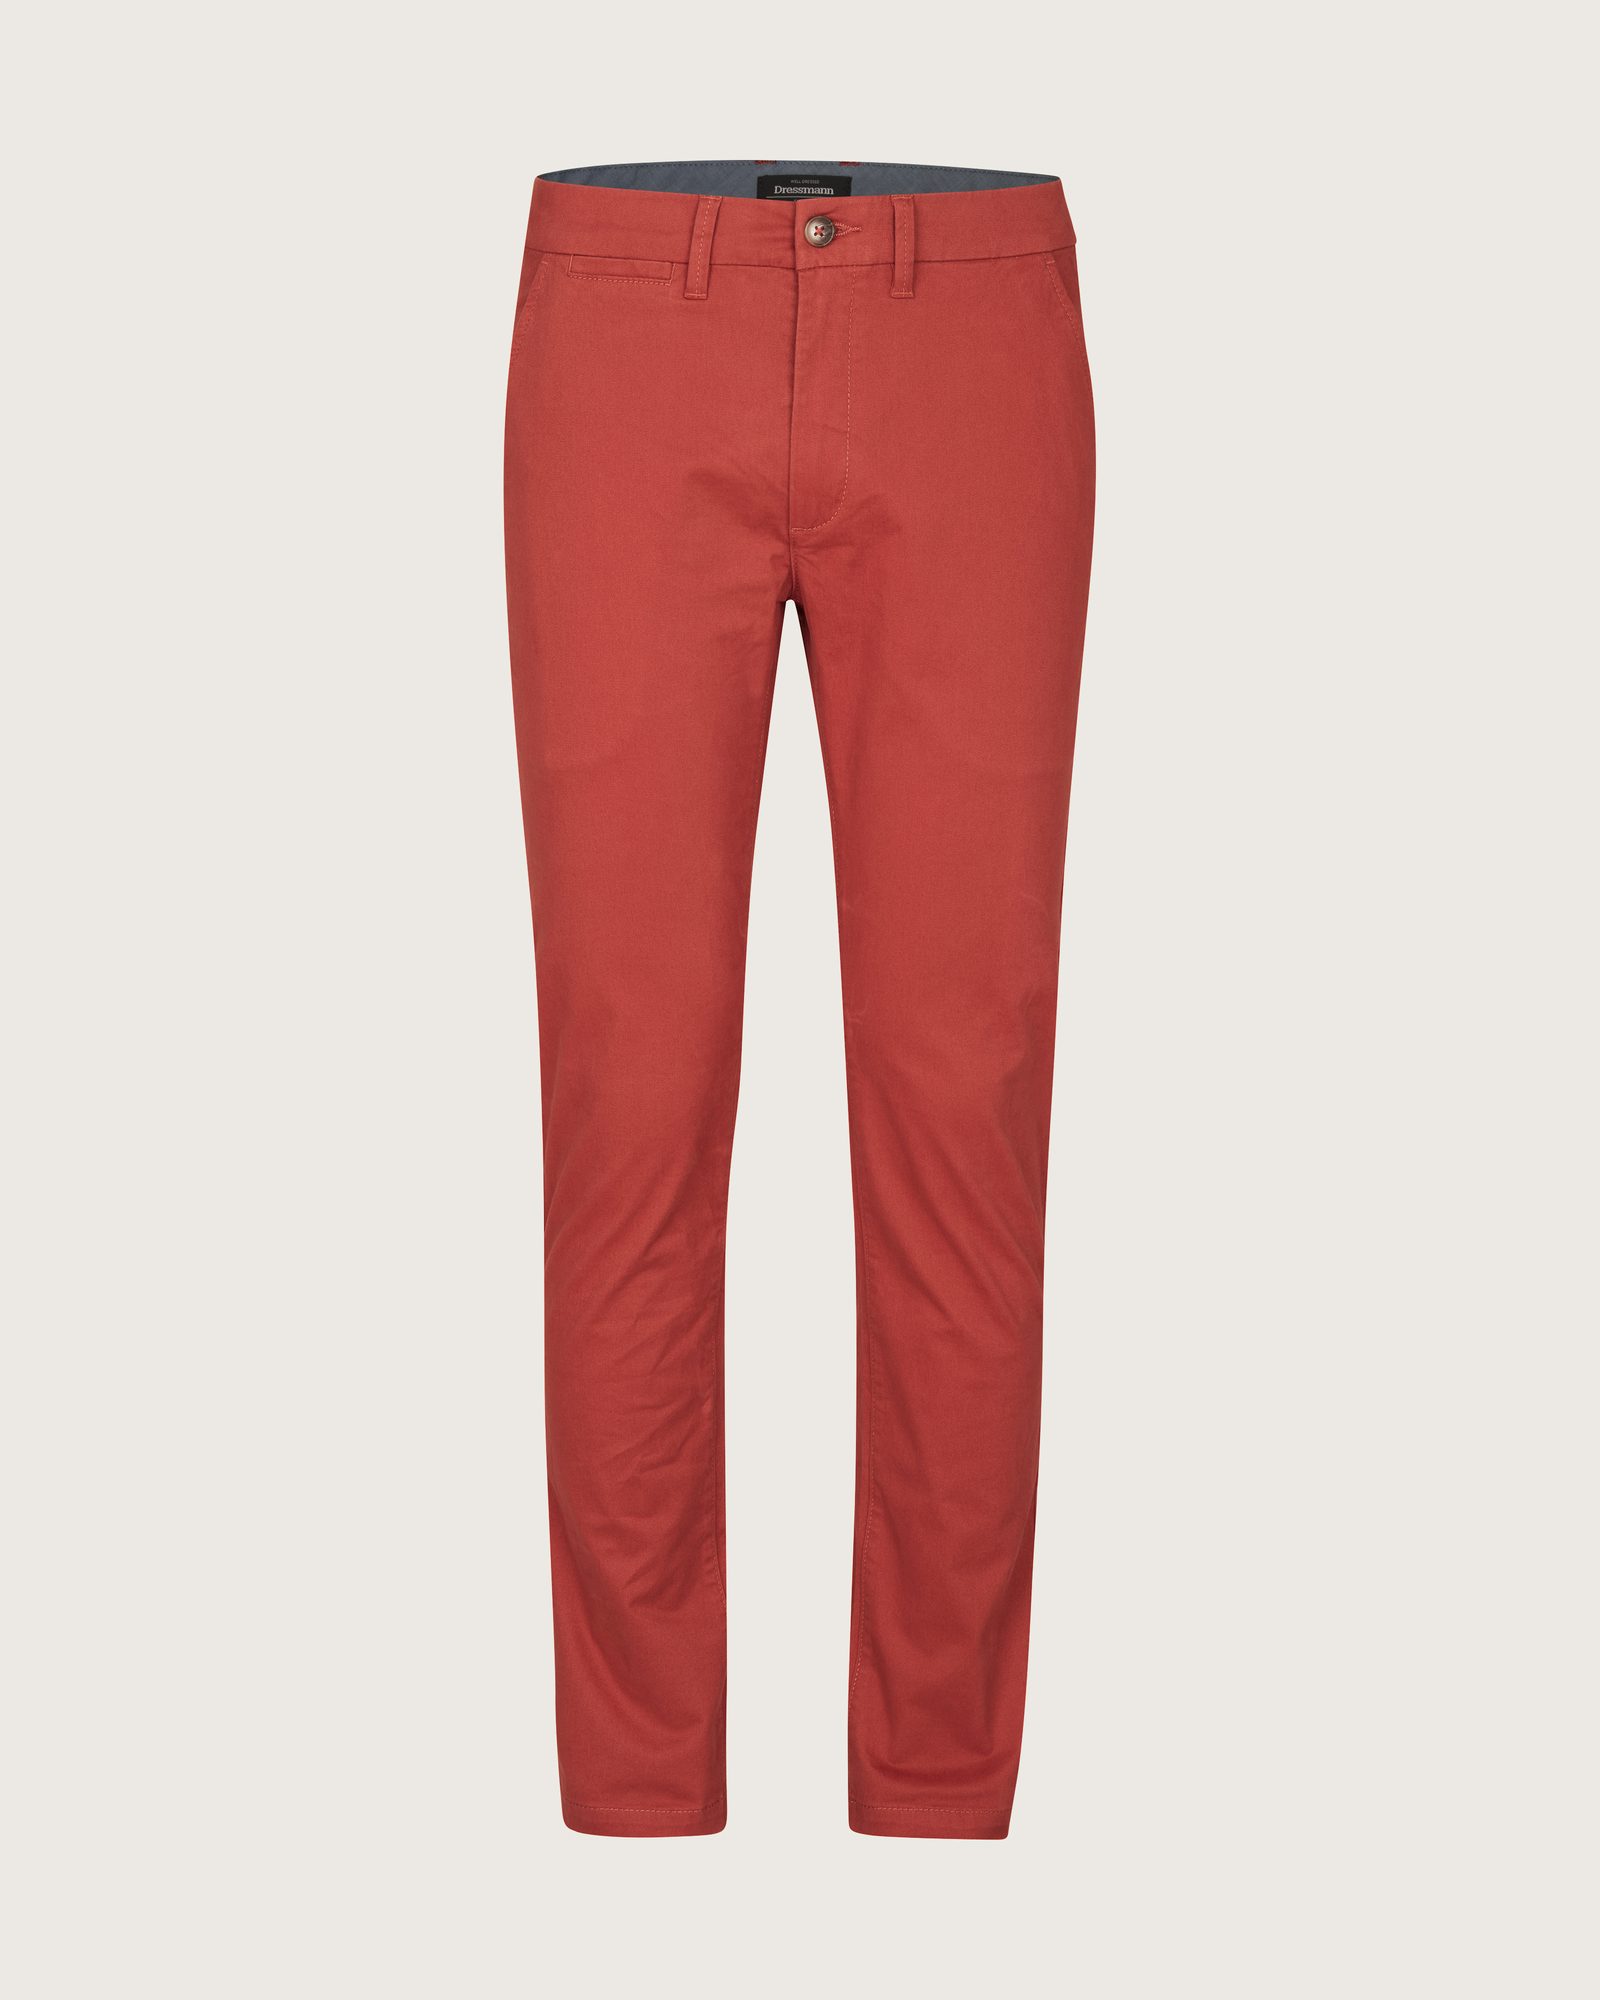 Buy Wine Red Chinos Limited Edition Burgundy Chinos Business Online in  India  Etsy